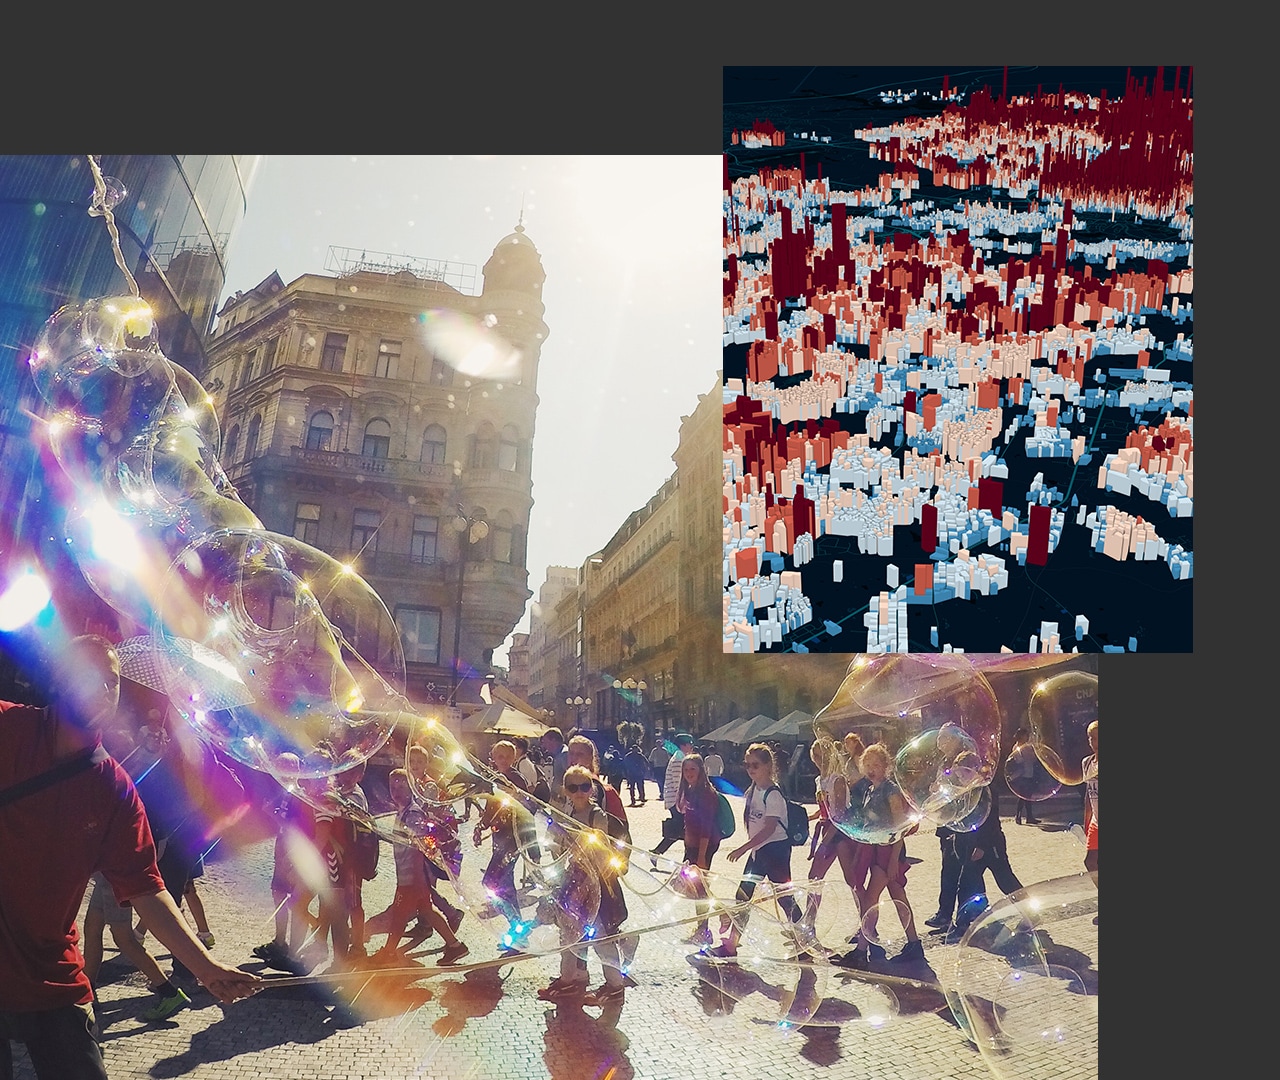 Buildings in an urban area with a crowd of people walking on the street next to an inset image of a digital 3D cityscape